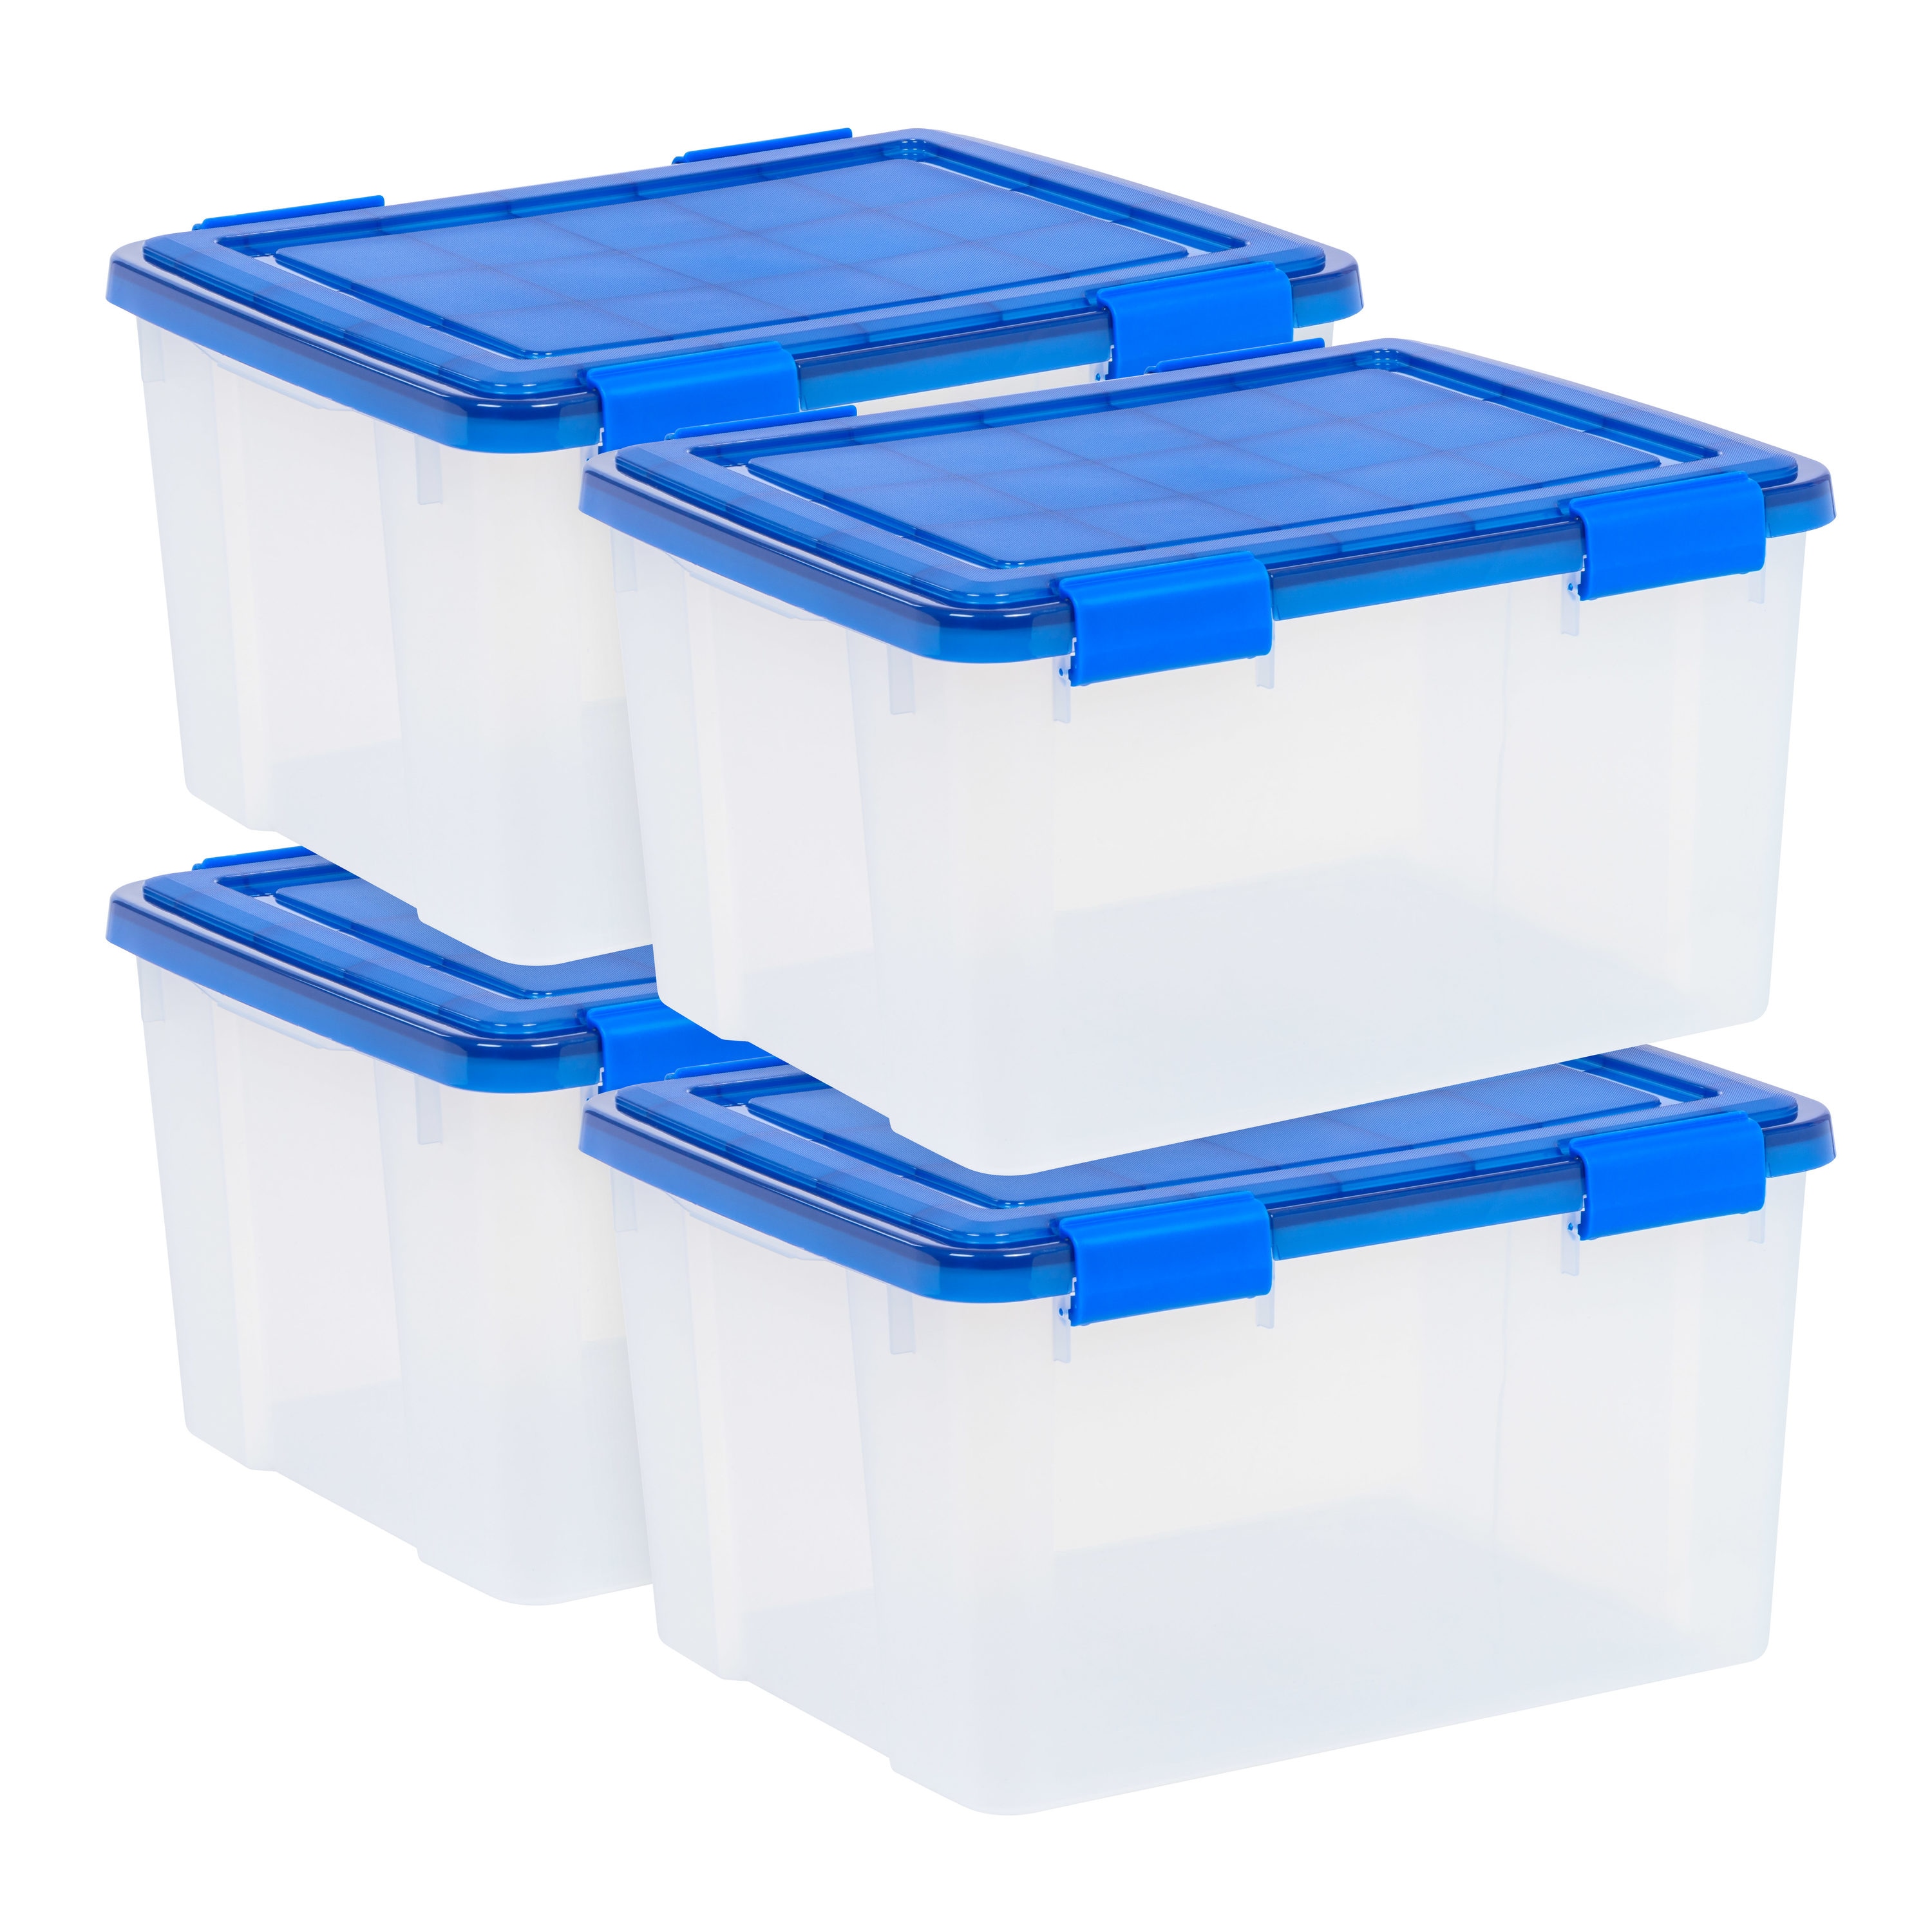 IRIS Plastic Storage Container With Handles/Latch Lid, 22 x 16 1/2 x 13,  Clear